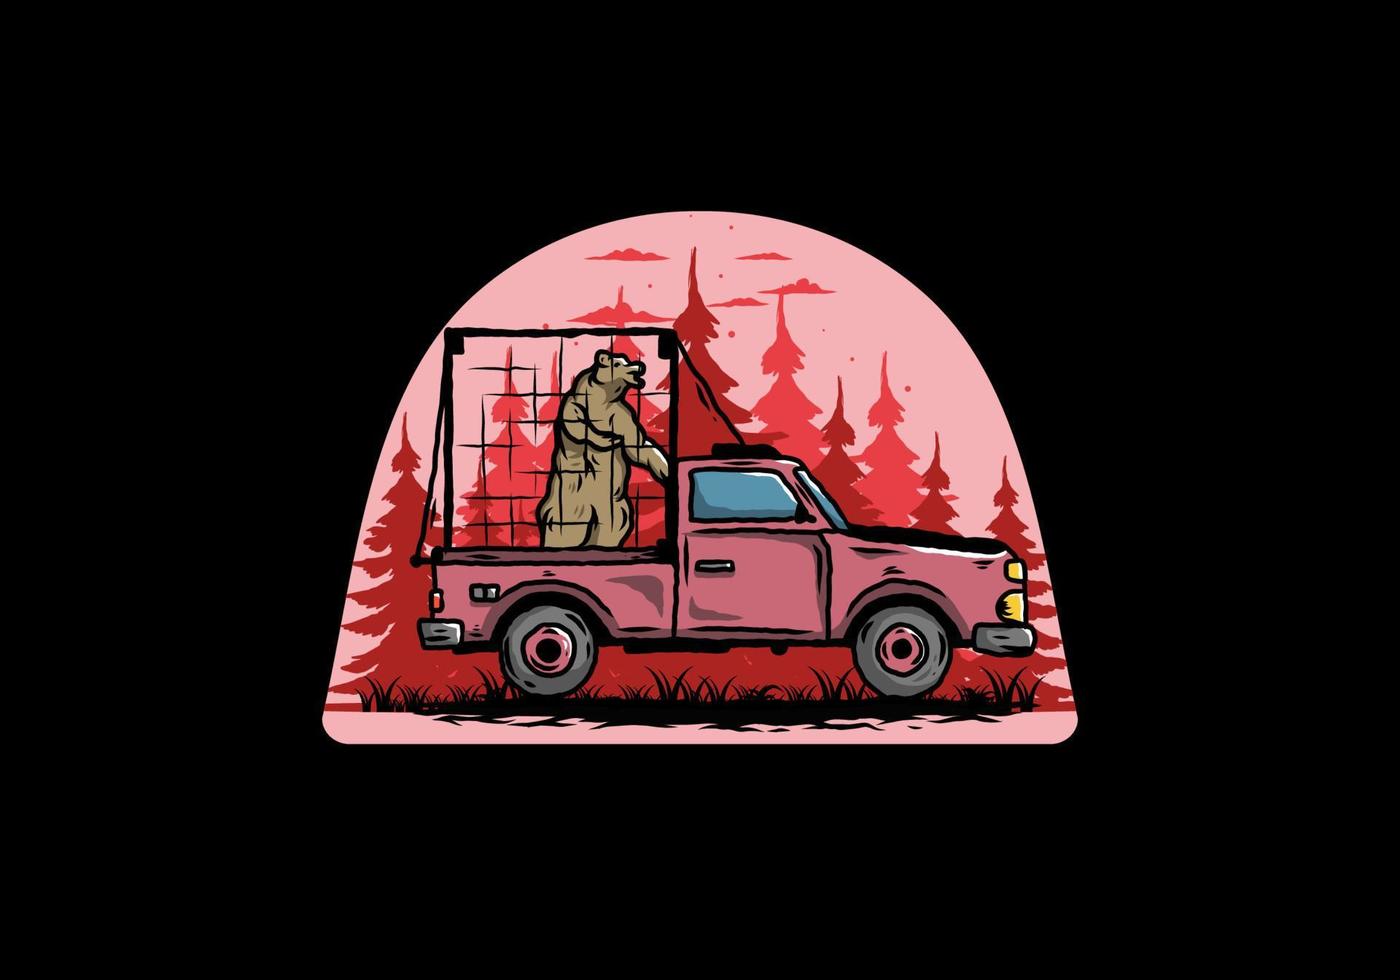 Big bear in cage on car illustration vector